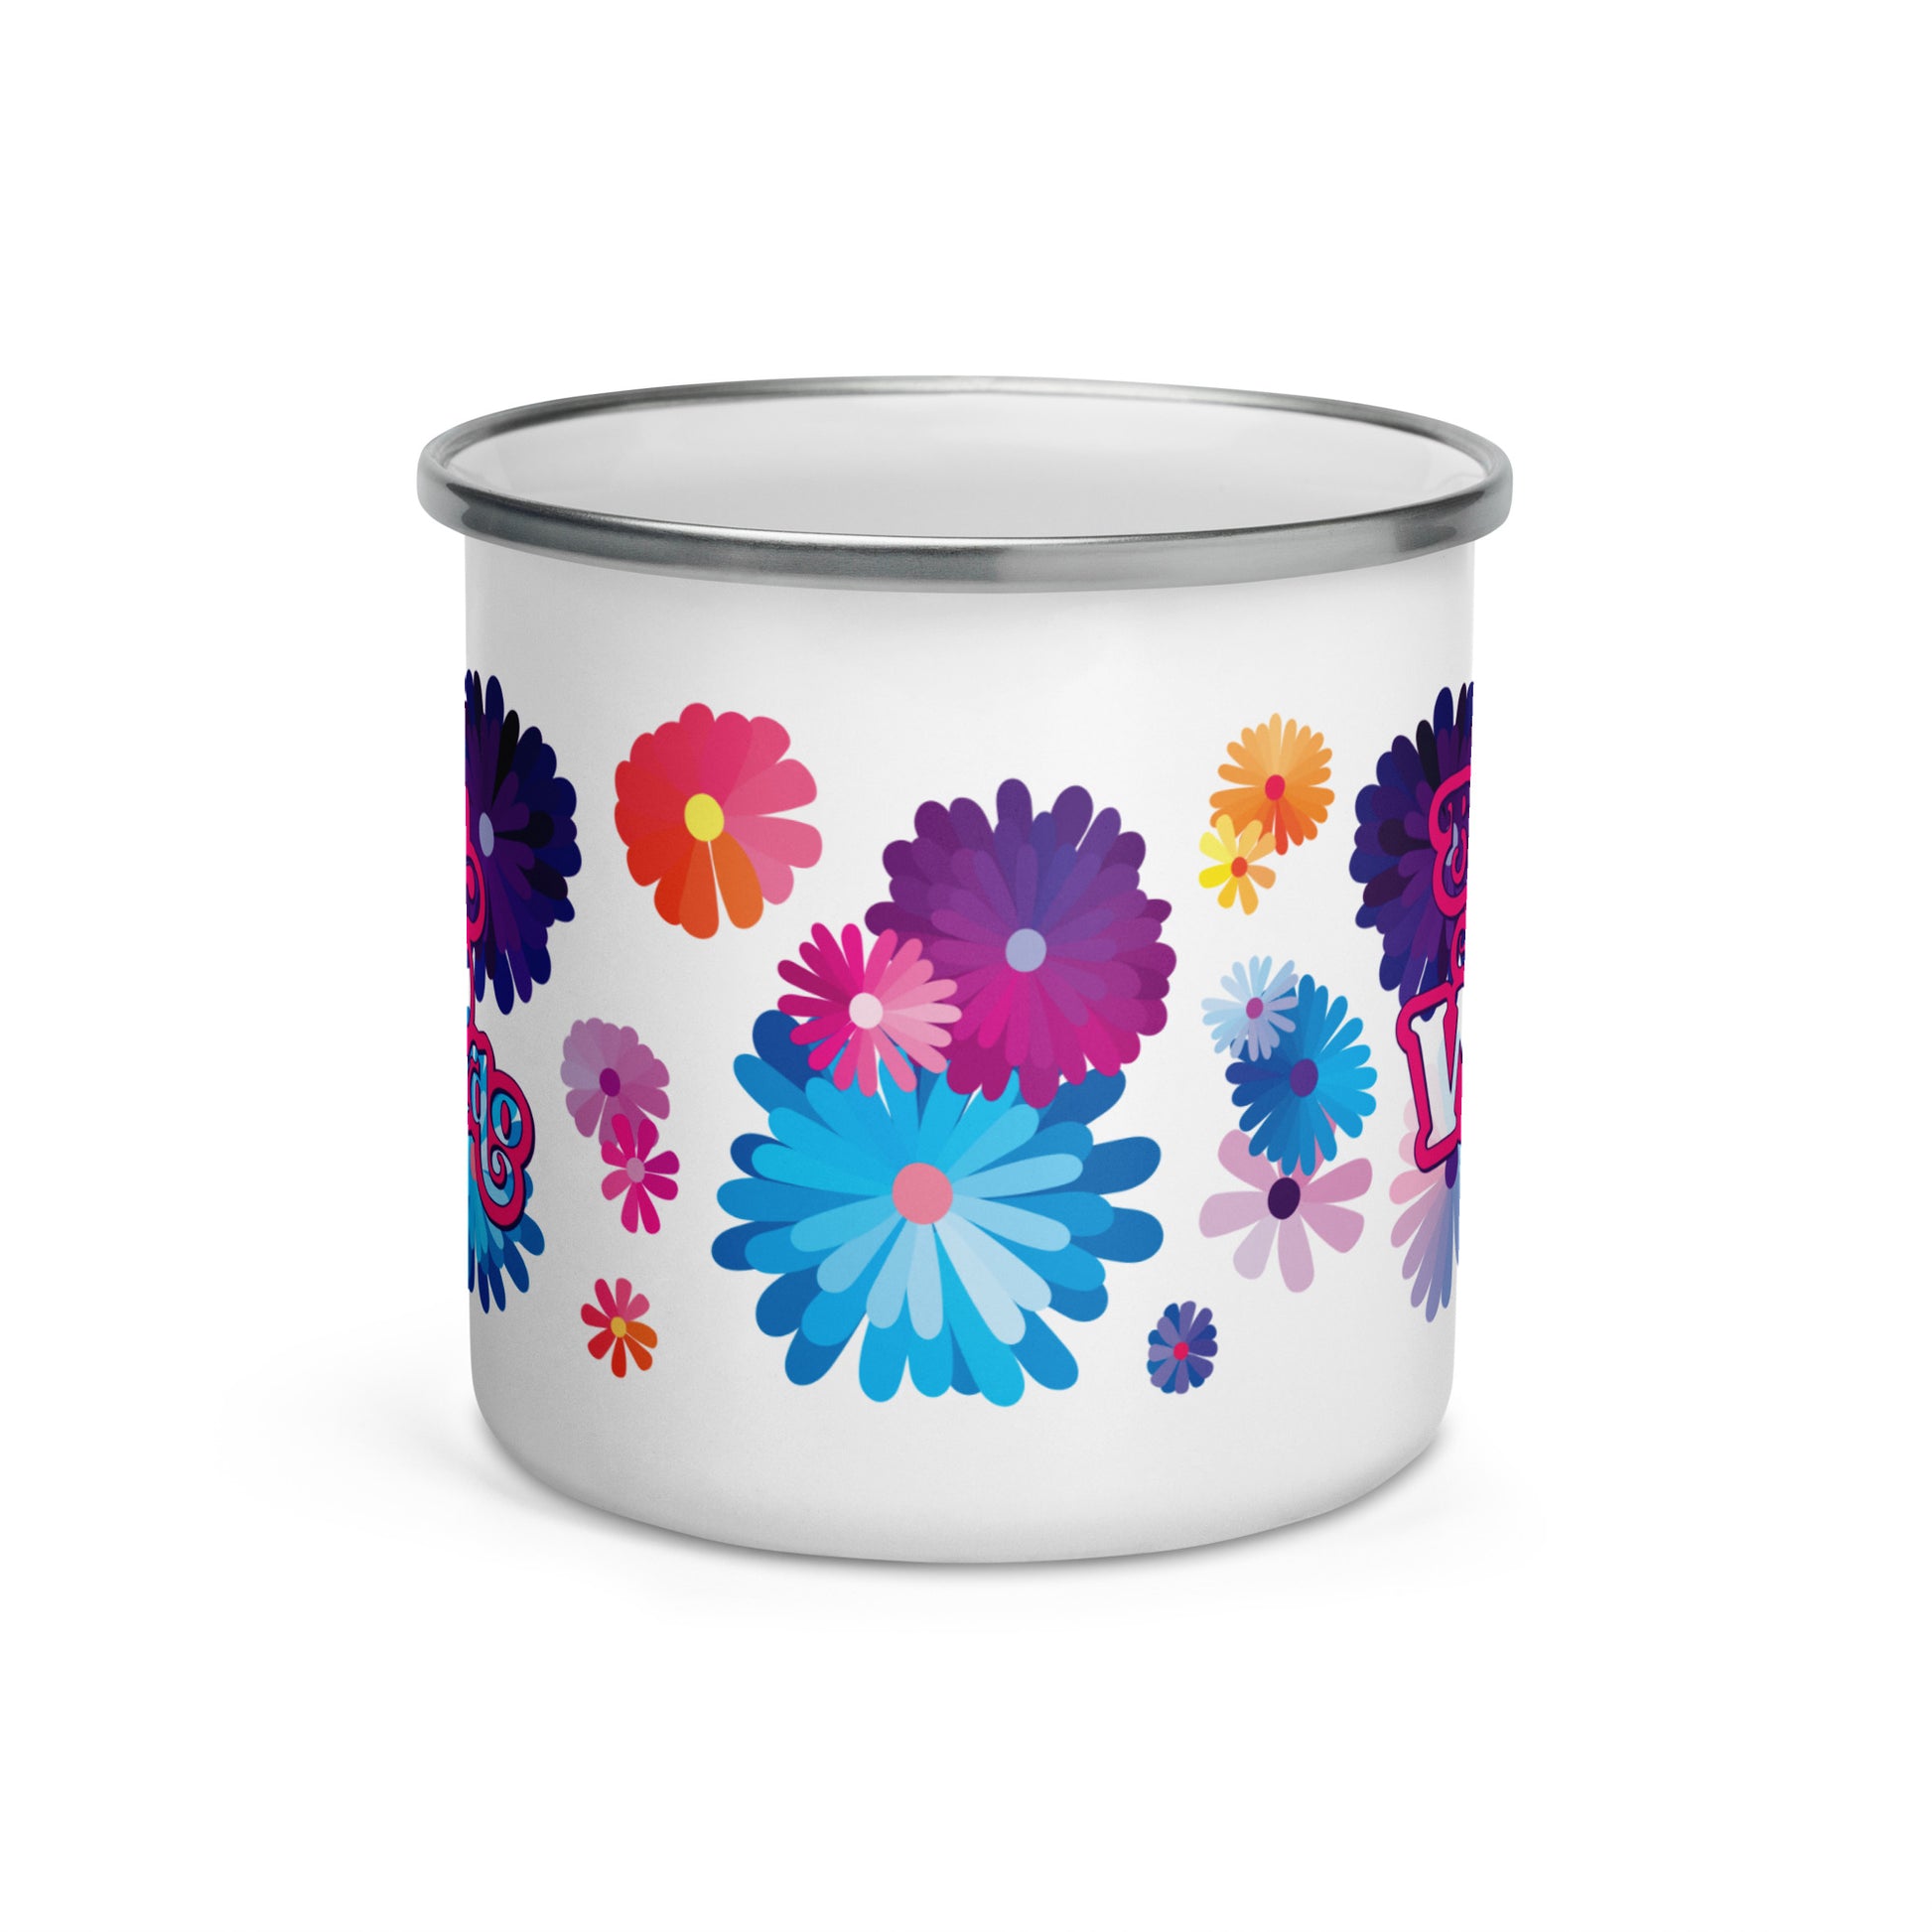 #WEIRDO | This enamel mug with flowers has the meme: 'Born a Weirdo' printed on 2 sides of the mug. Awesome partygift for your weird ass friend!